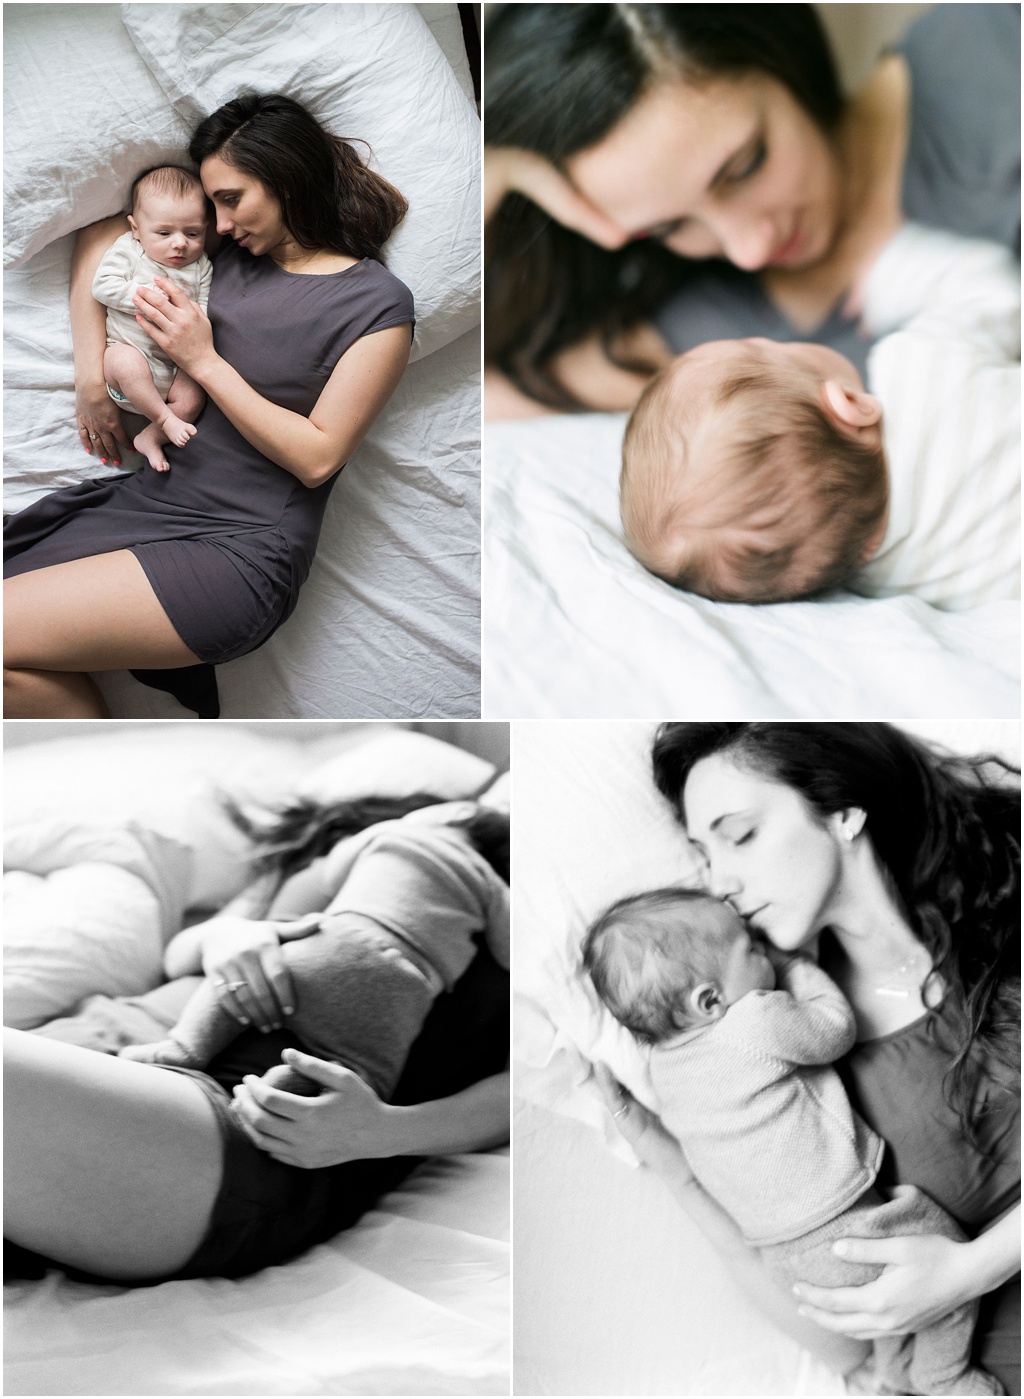 hinsdale-baby-photographers- mom and baby snuggling on bed